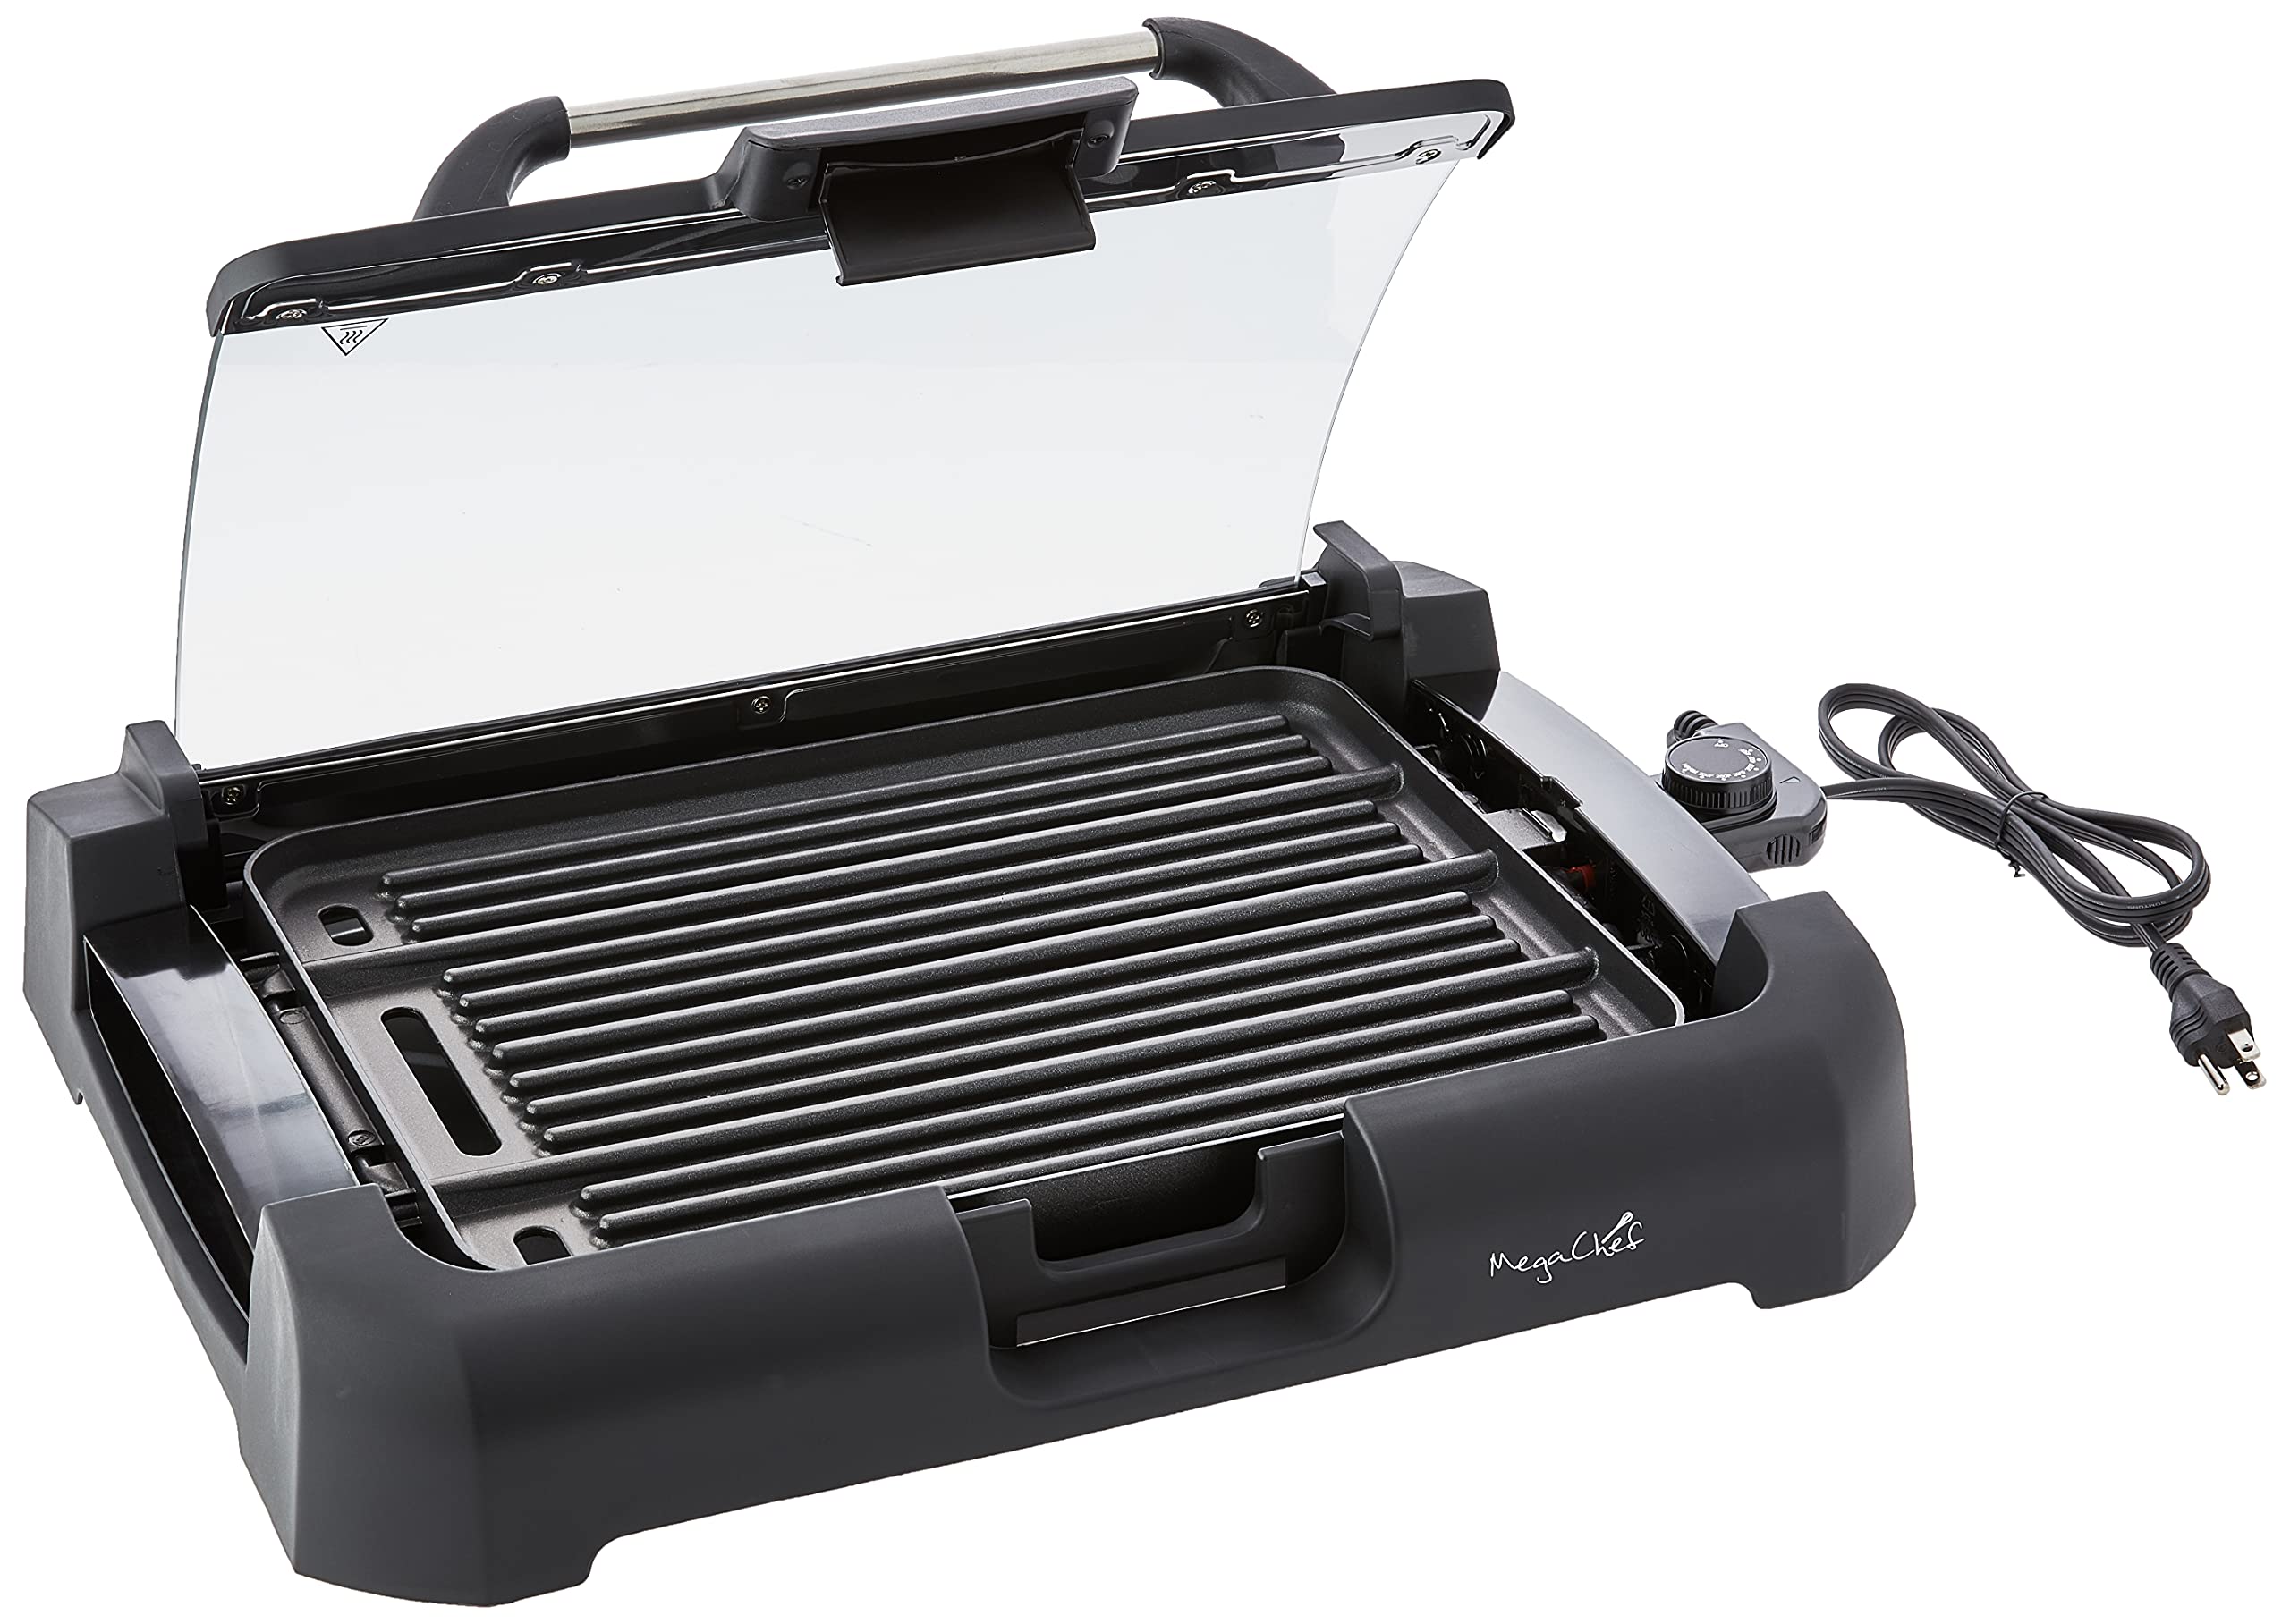 8 Amazing Megachef Dual Surface Reversible Indoor Grill And Griddle for 2023